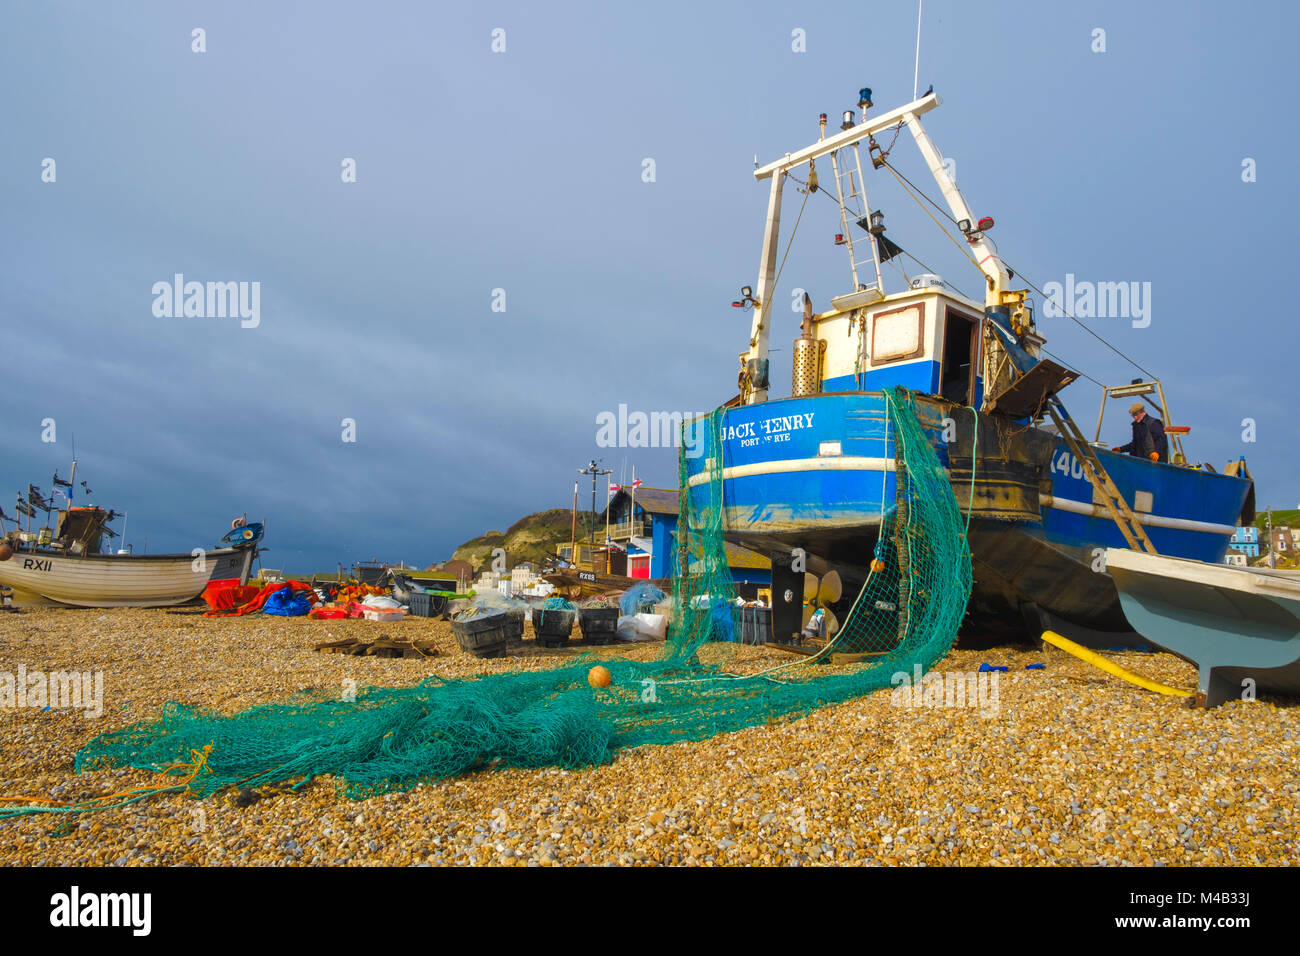 Fishing boat Jack Henry Hastings Old Town Stade Fishing Boat Beach  drying nets on a winter day Stock Photo